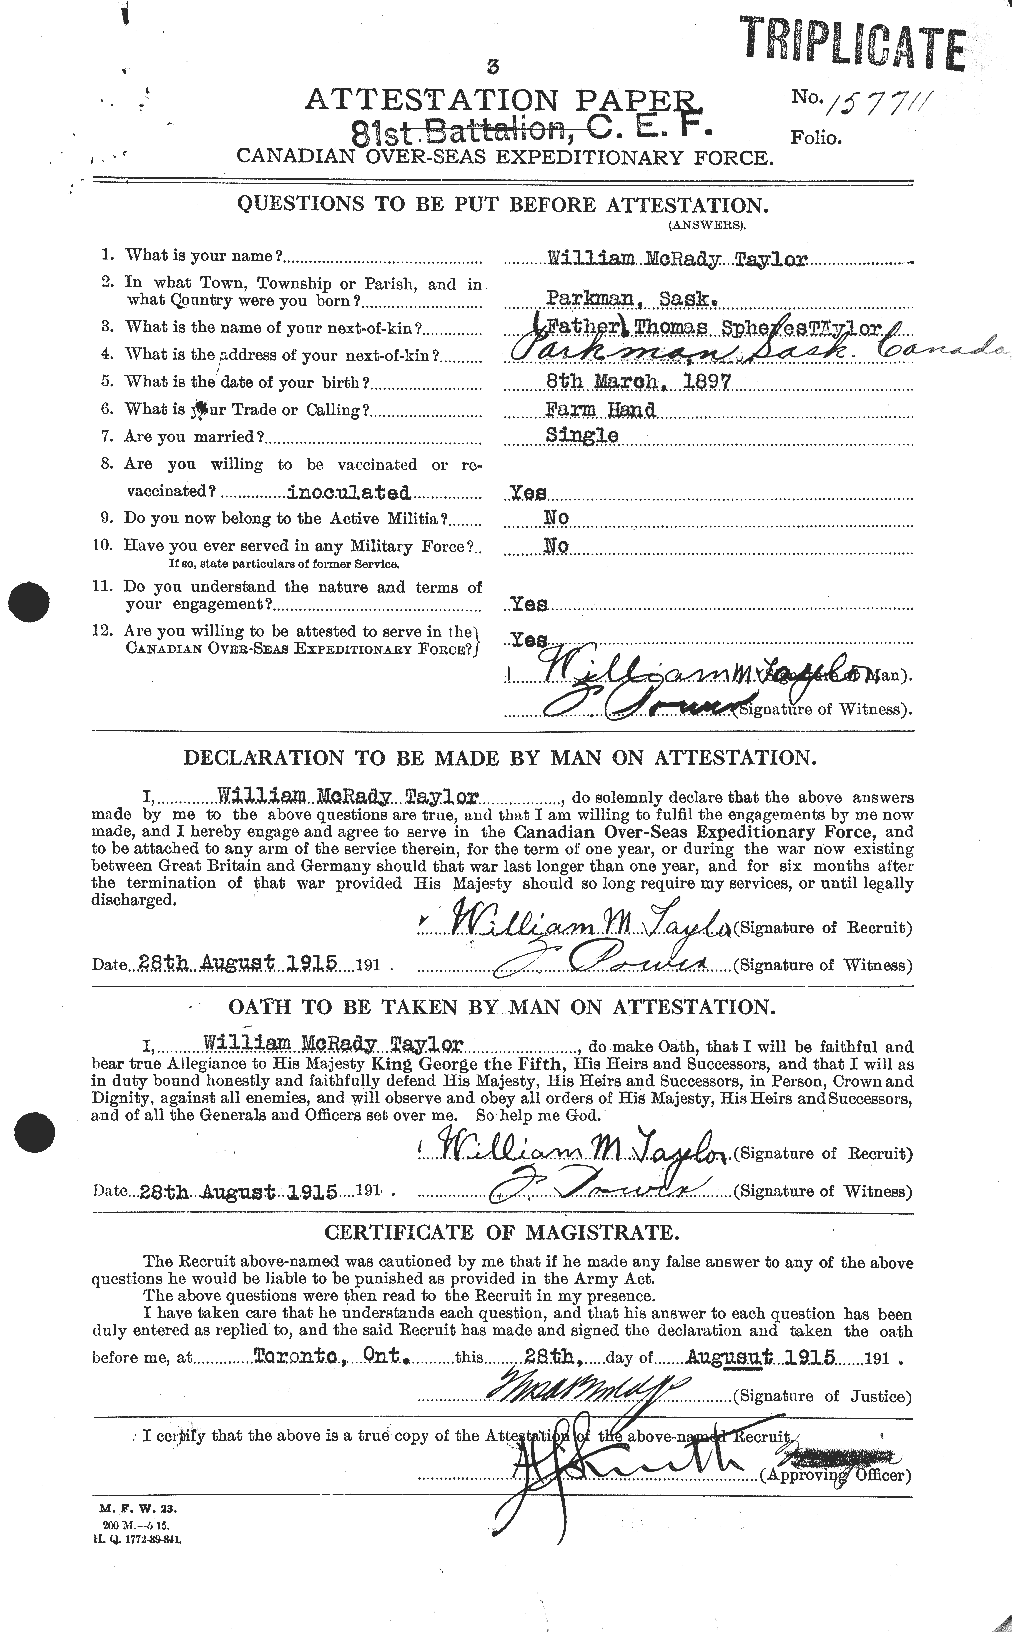 Personnel Records of the First World War - CEF 628328a